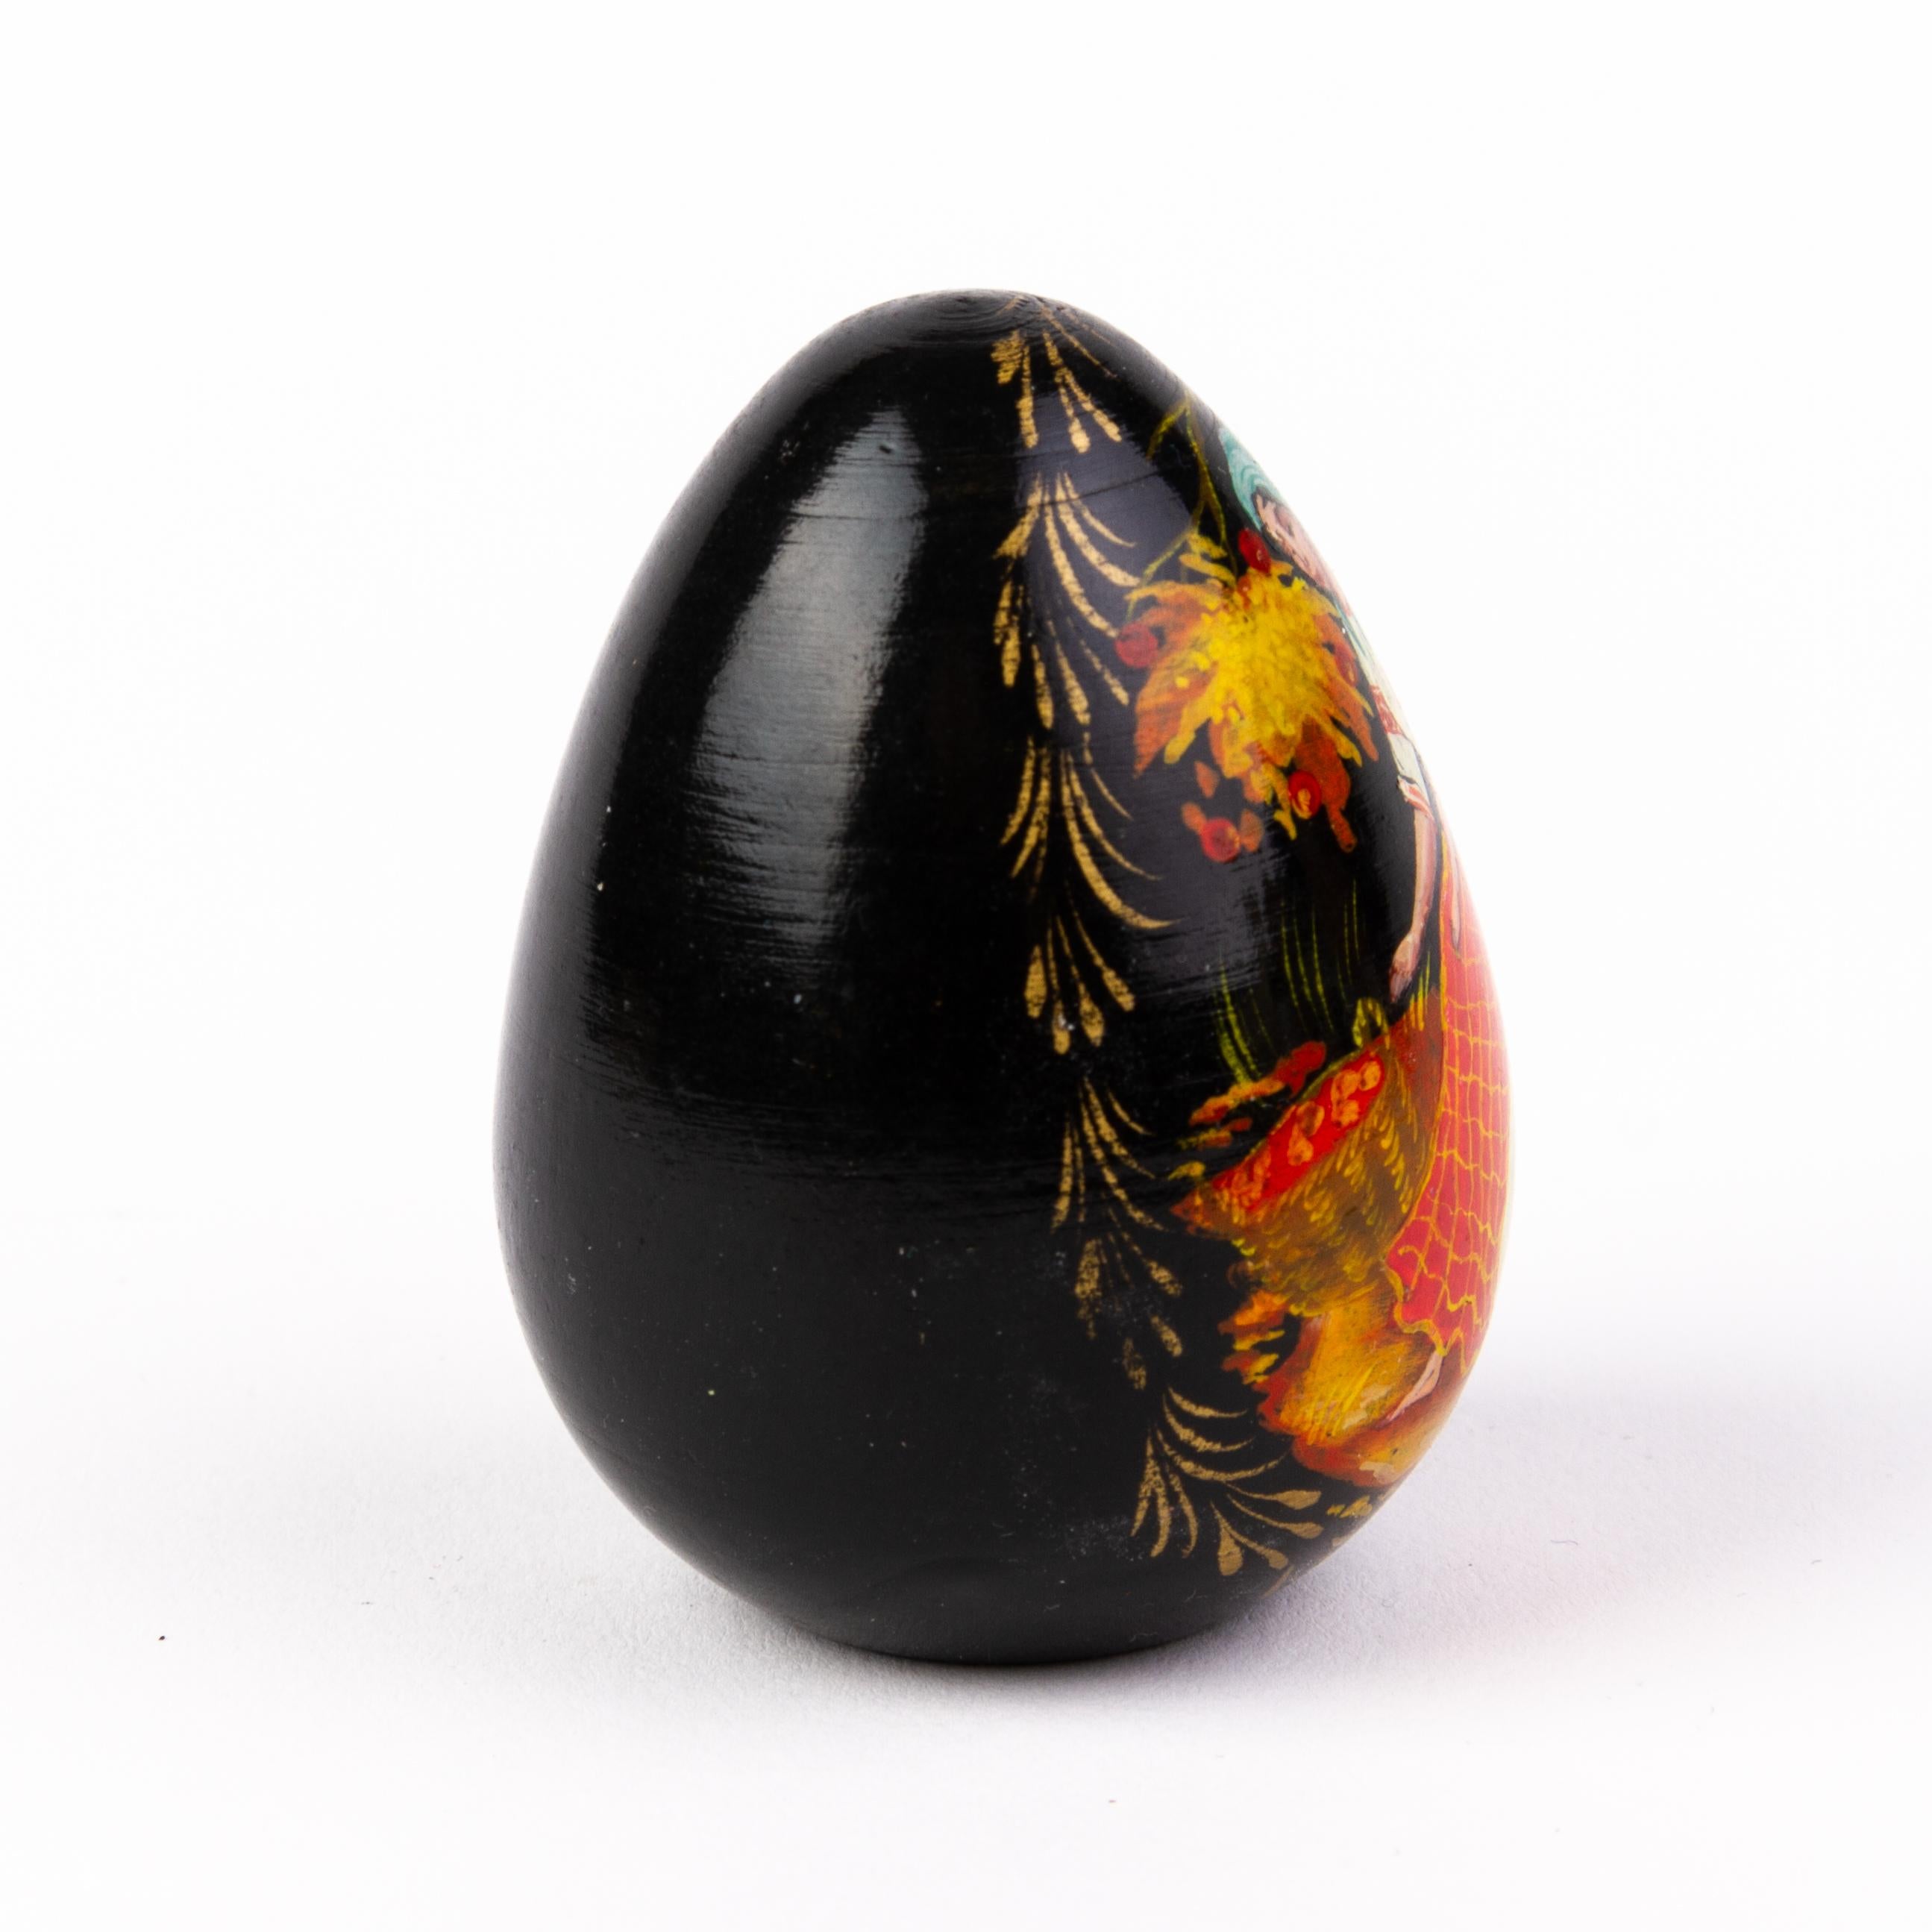 In good condition
From a private collection
Russian Lacquered Hand Painted Folk Egg 